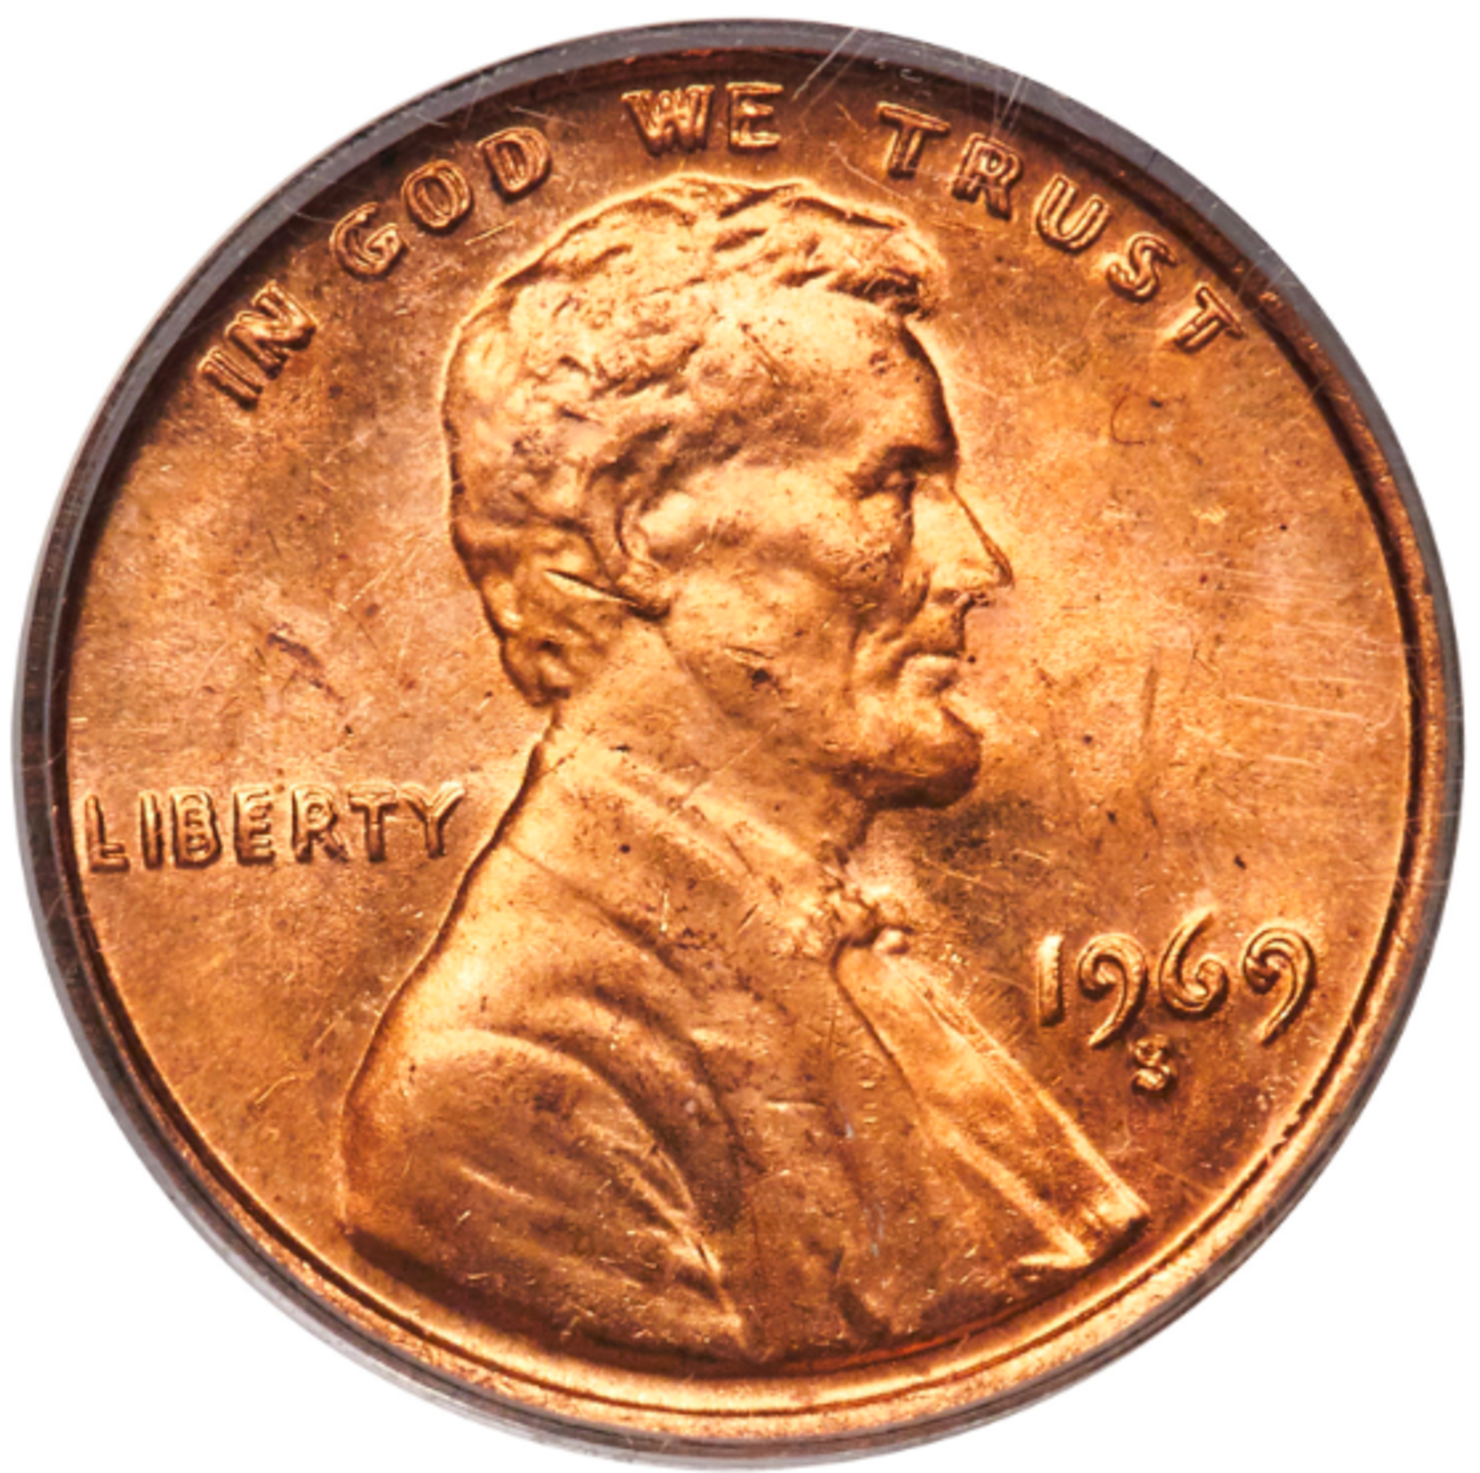 Rare Pennies Worth Millions: Do You Have One?